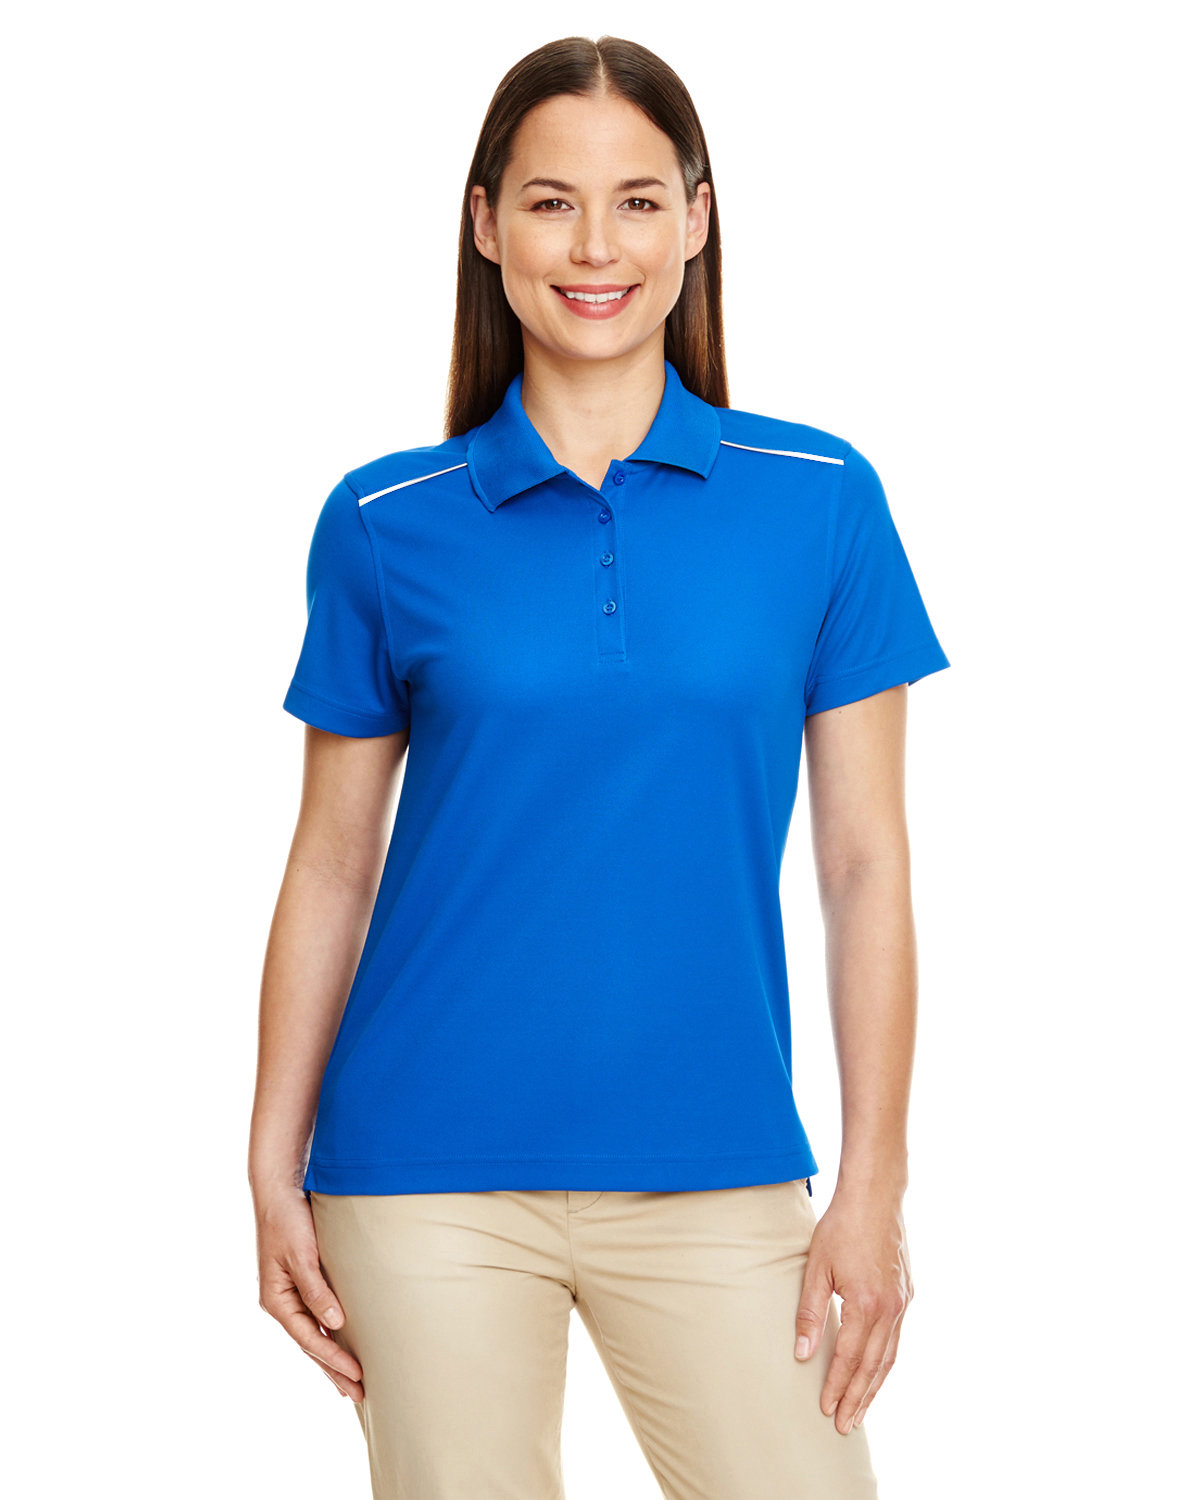 Ladies Radiant Performance Pique Polo With Reflective Piping-